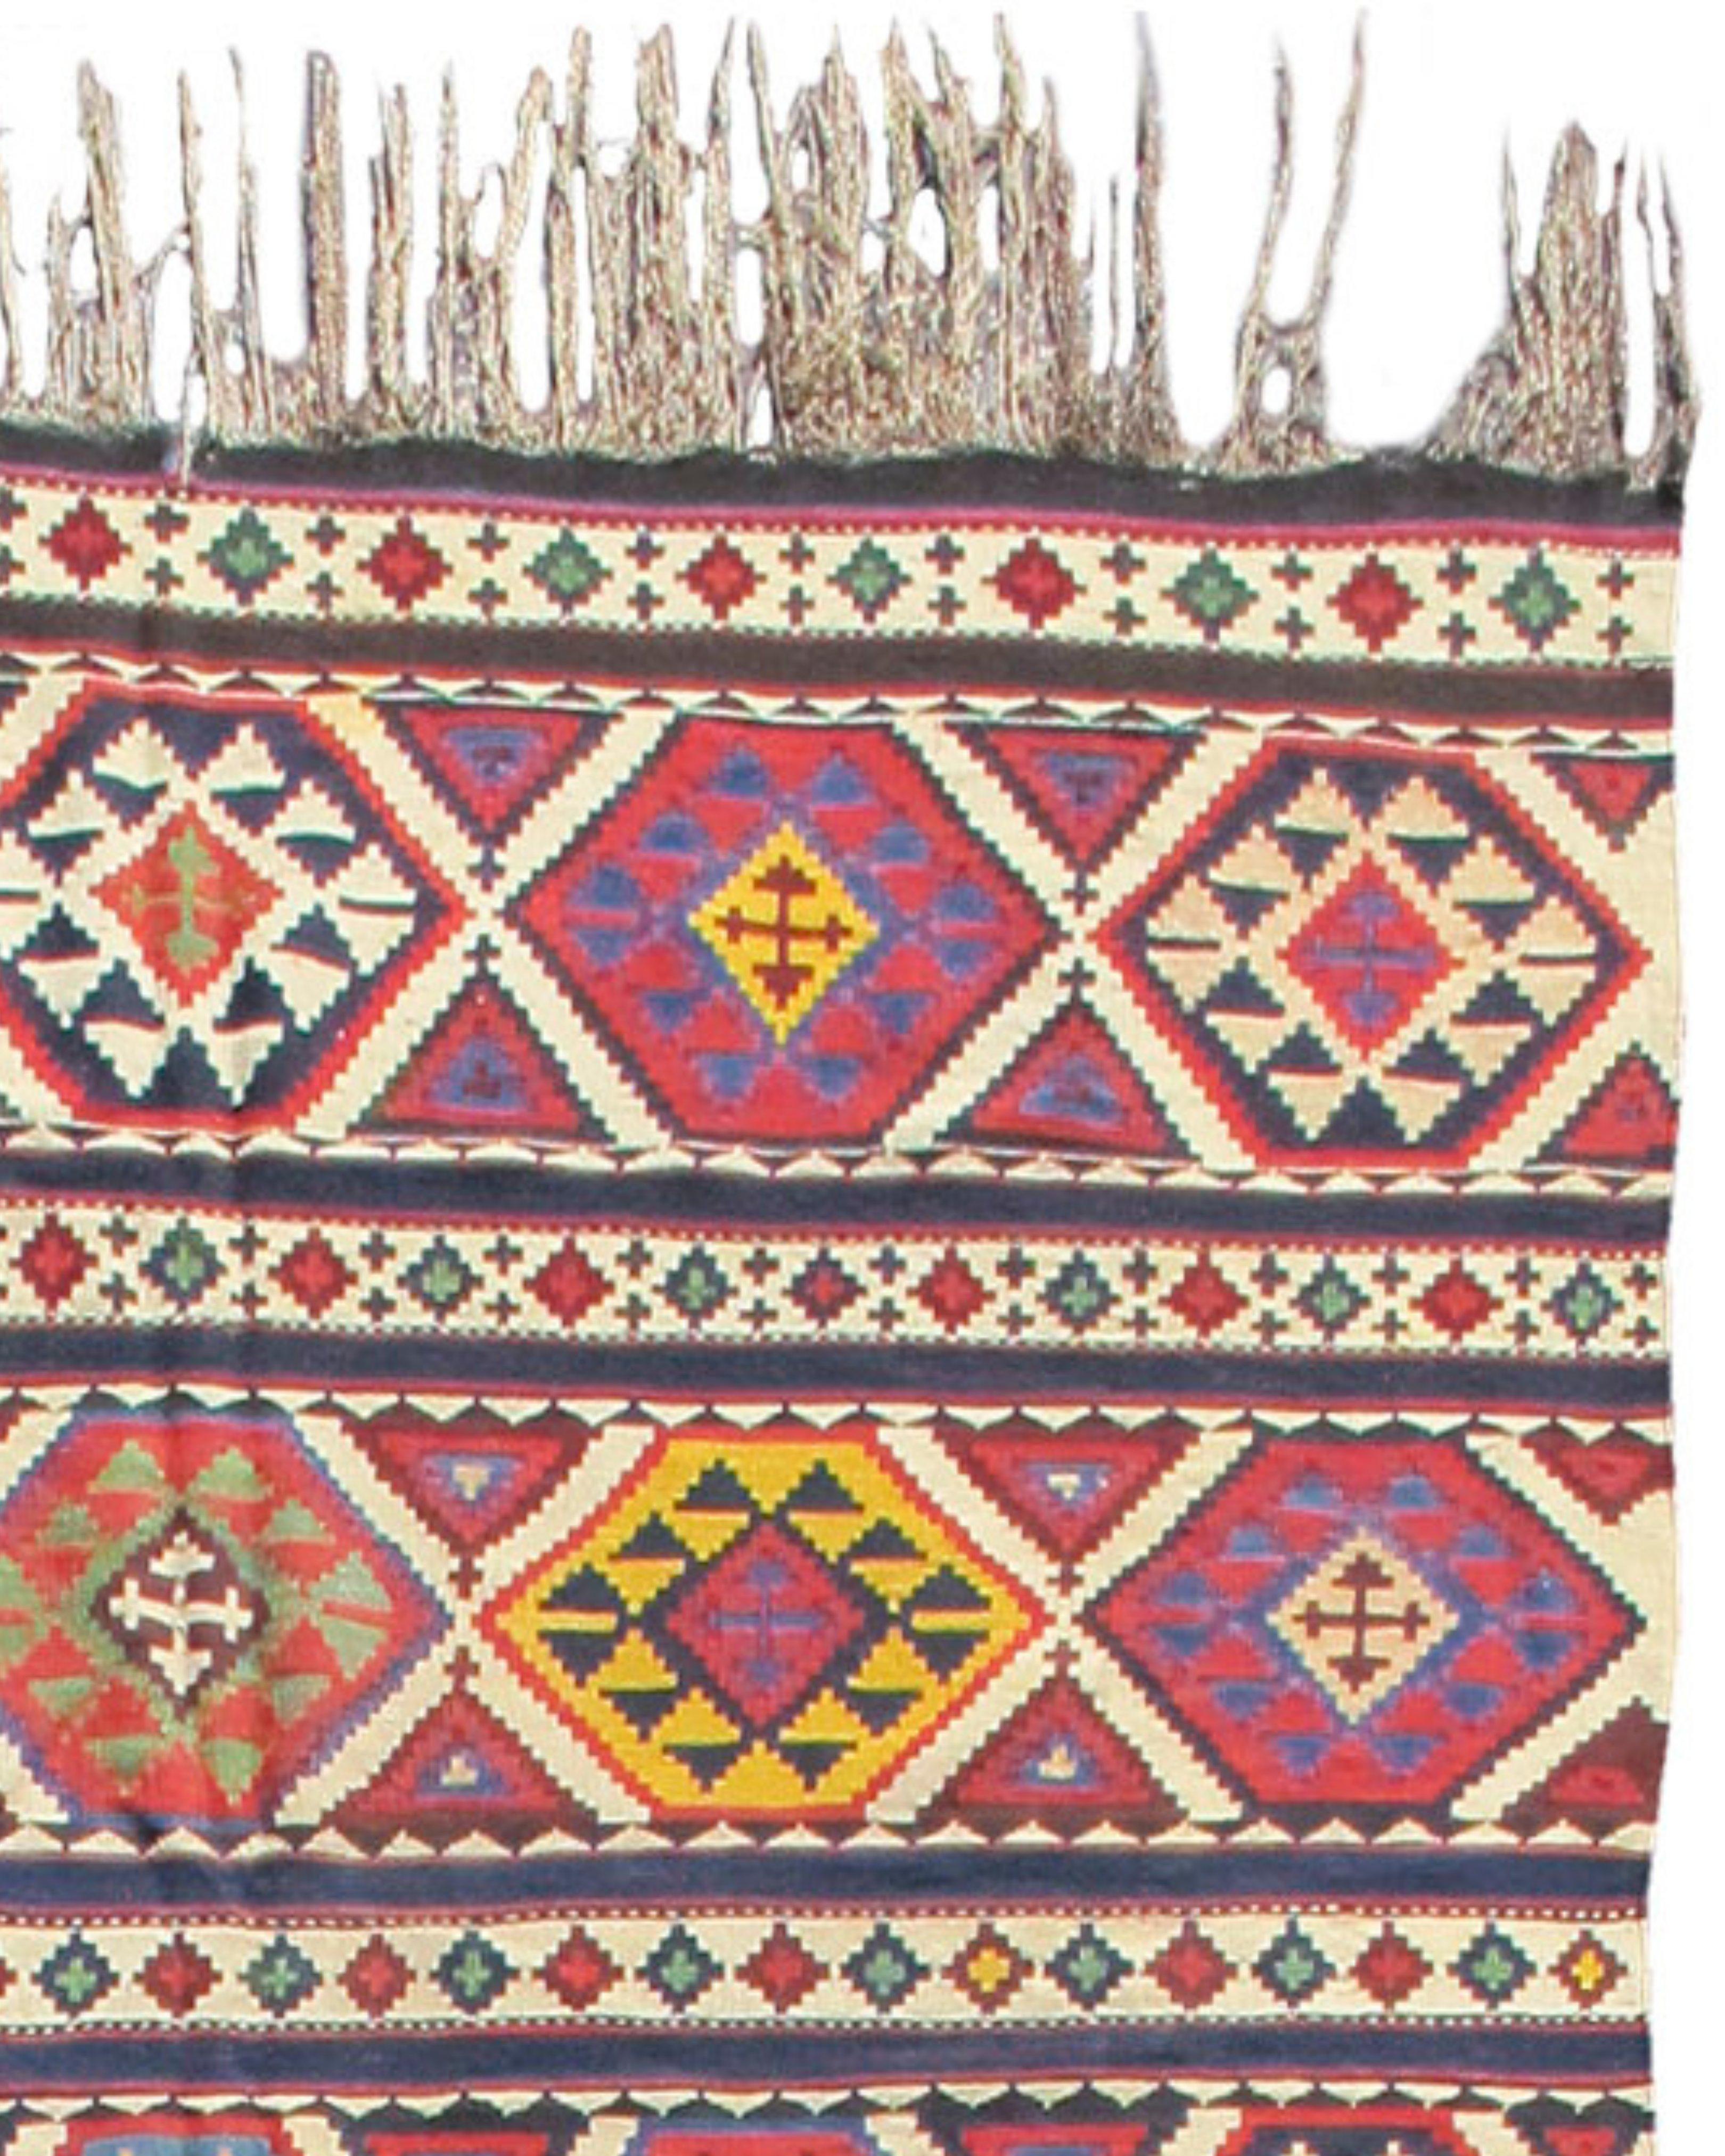 Antique Shirvan Kilim Rug, Late 19th Century

Additional Information:
Dimensions: 5'2